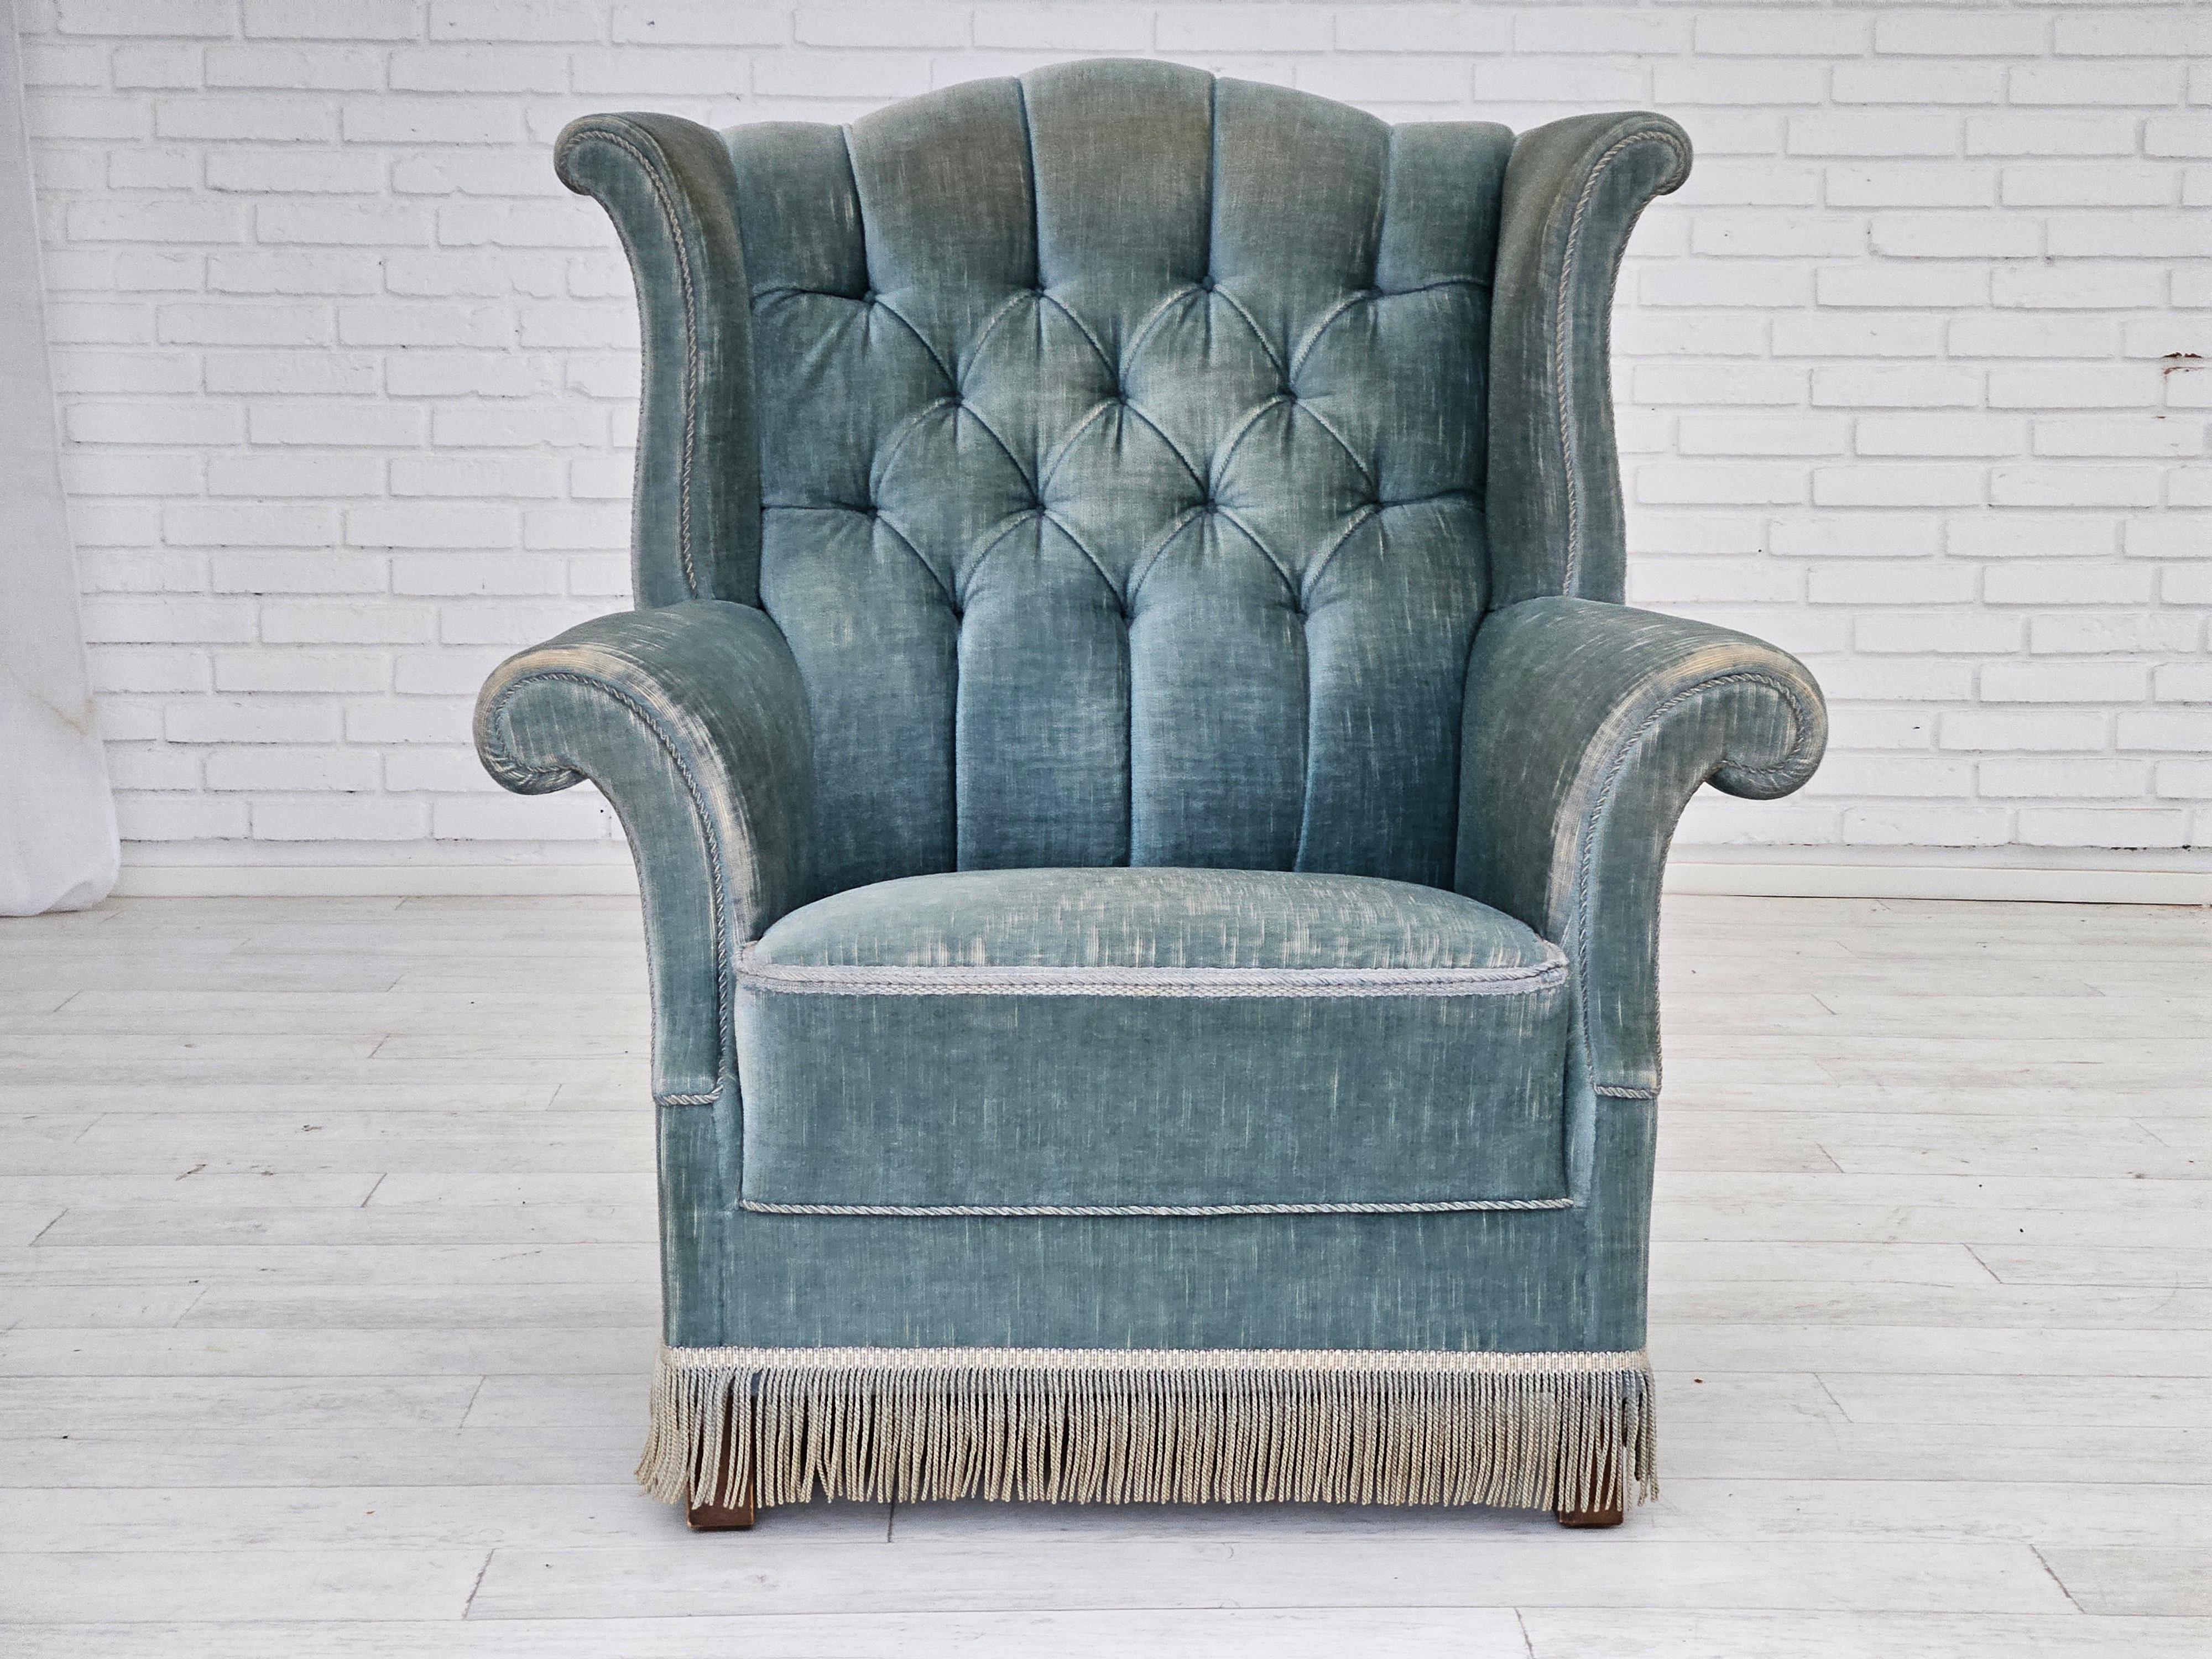 1950-60s, Danish wingback armchair in original light blue velour. Original good condition with nice patina: no smells and no stains. Beech wood legs, springs in the seat. Manufactured by Danish furniture manufacturer in about 1955s.